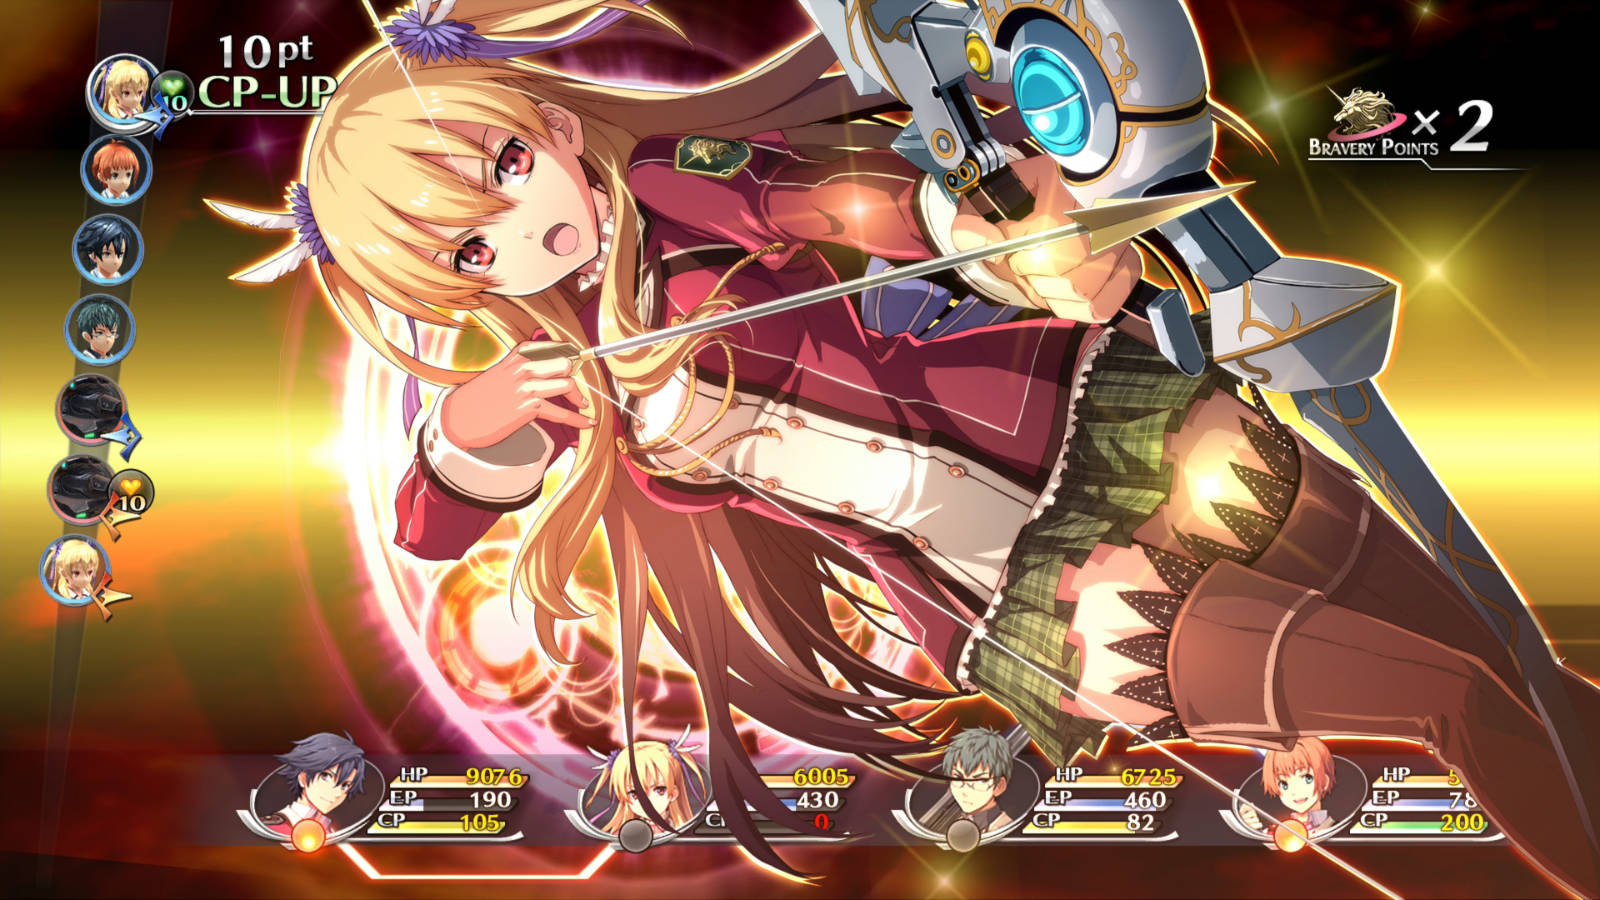 The Legend of Heroes: Trails of Cold Steel Screenshot